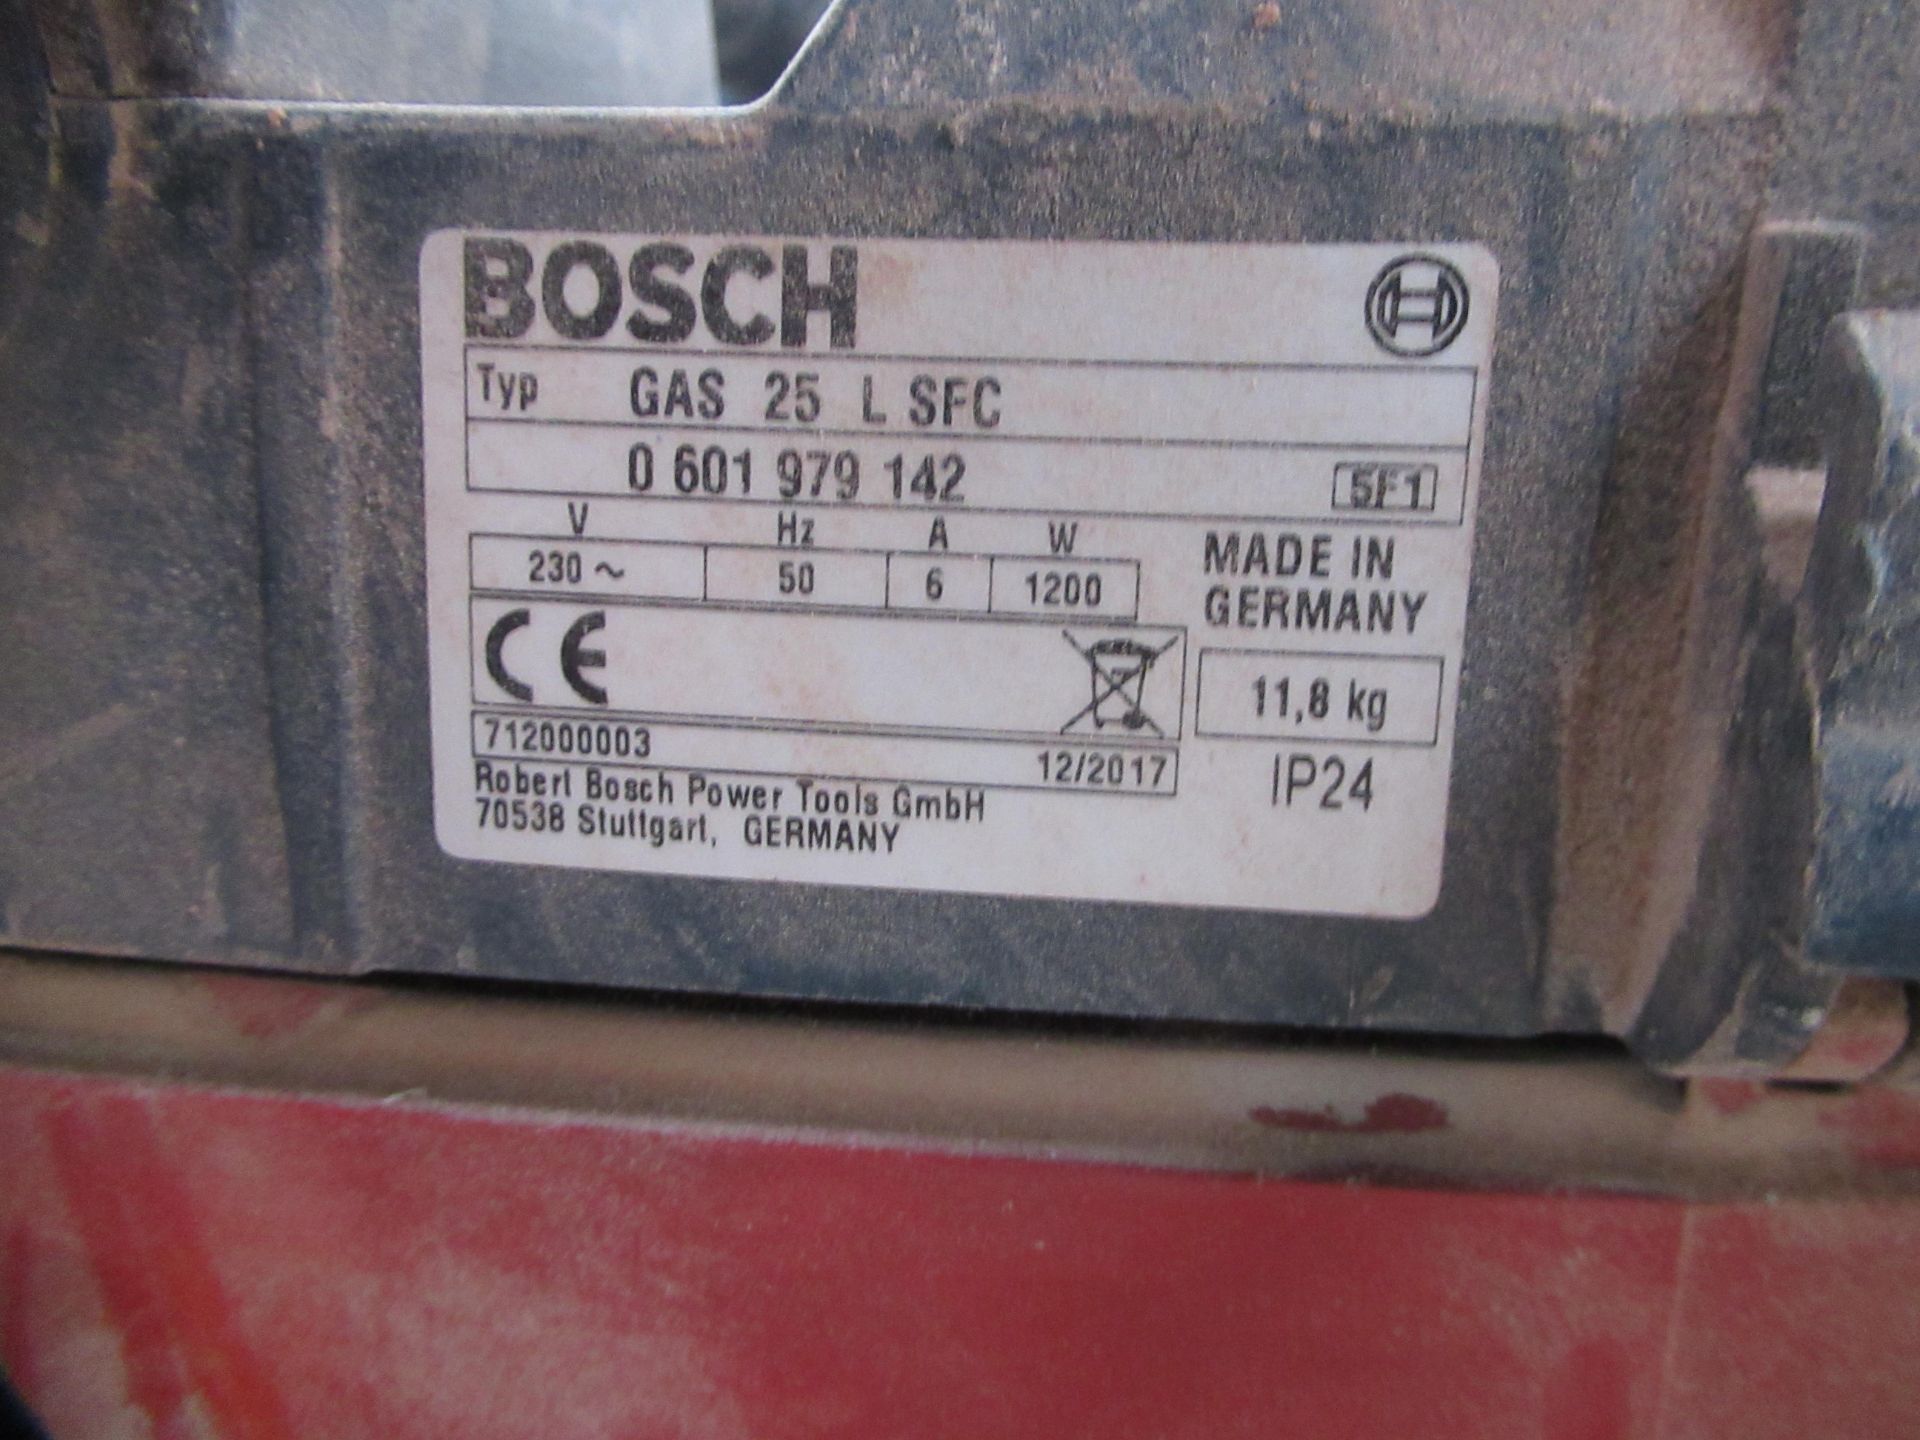 Bosch Professional GAS25LSFC Mobile Vacuum Cleaner - No hose - Image 3 of 3